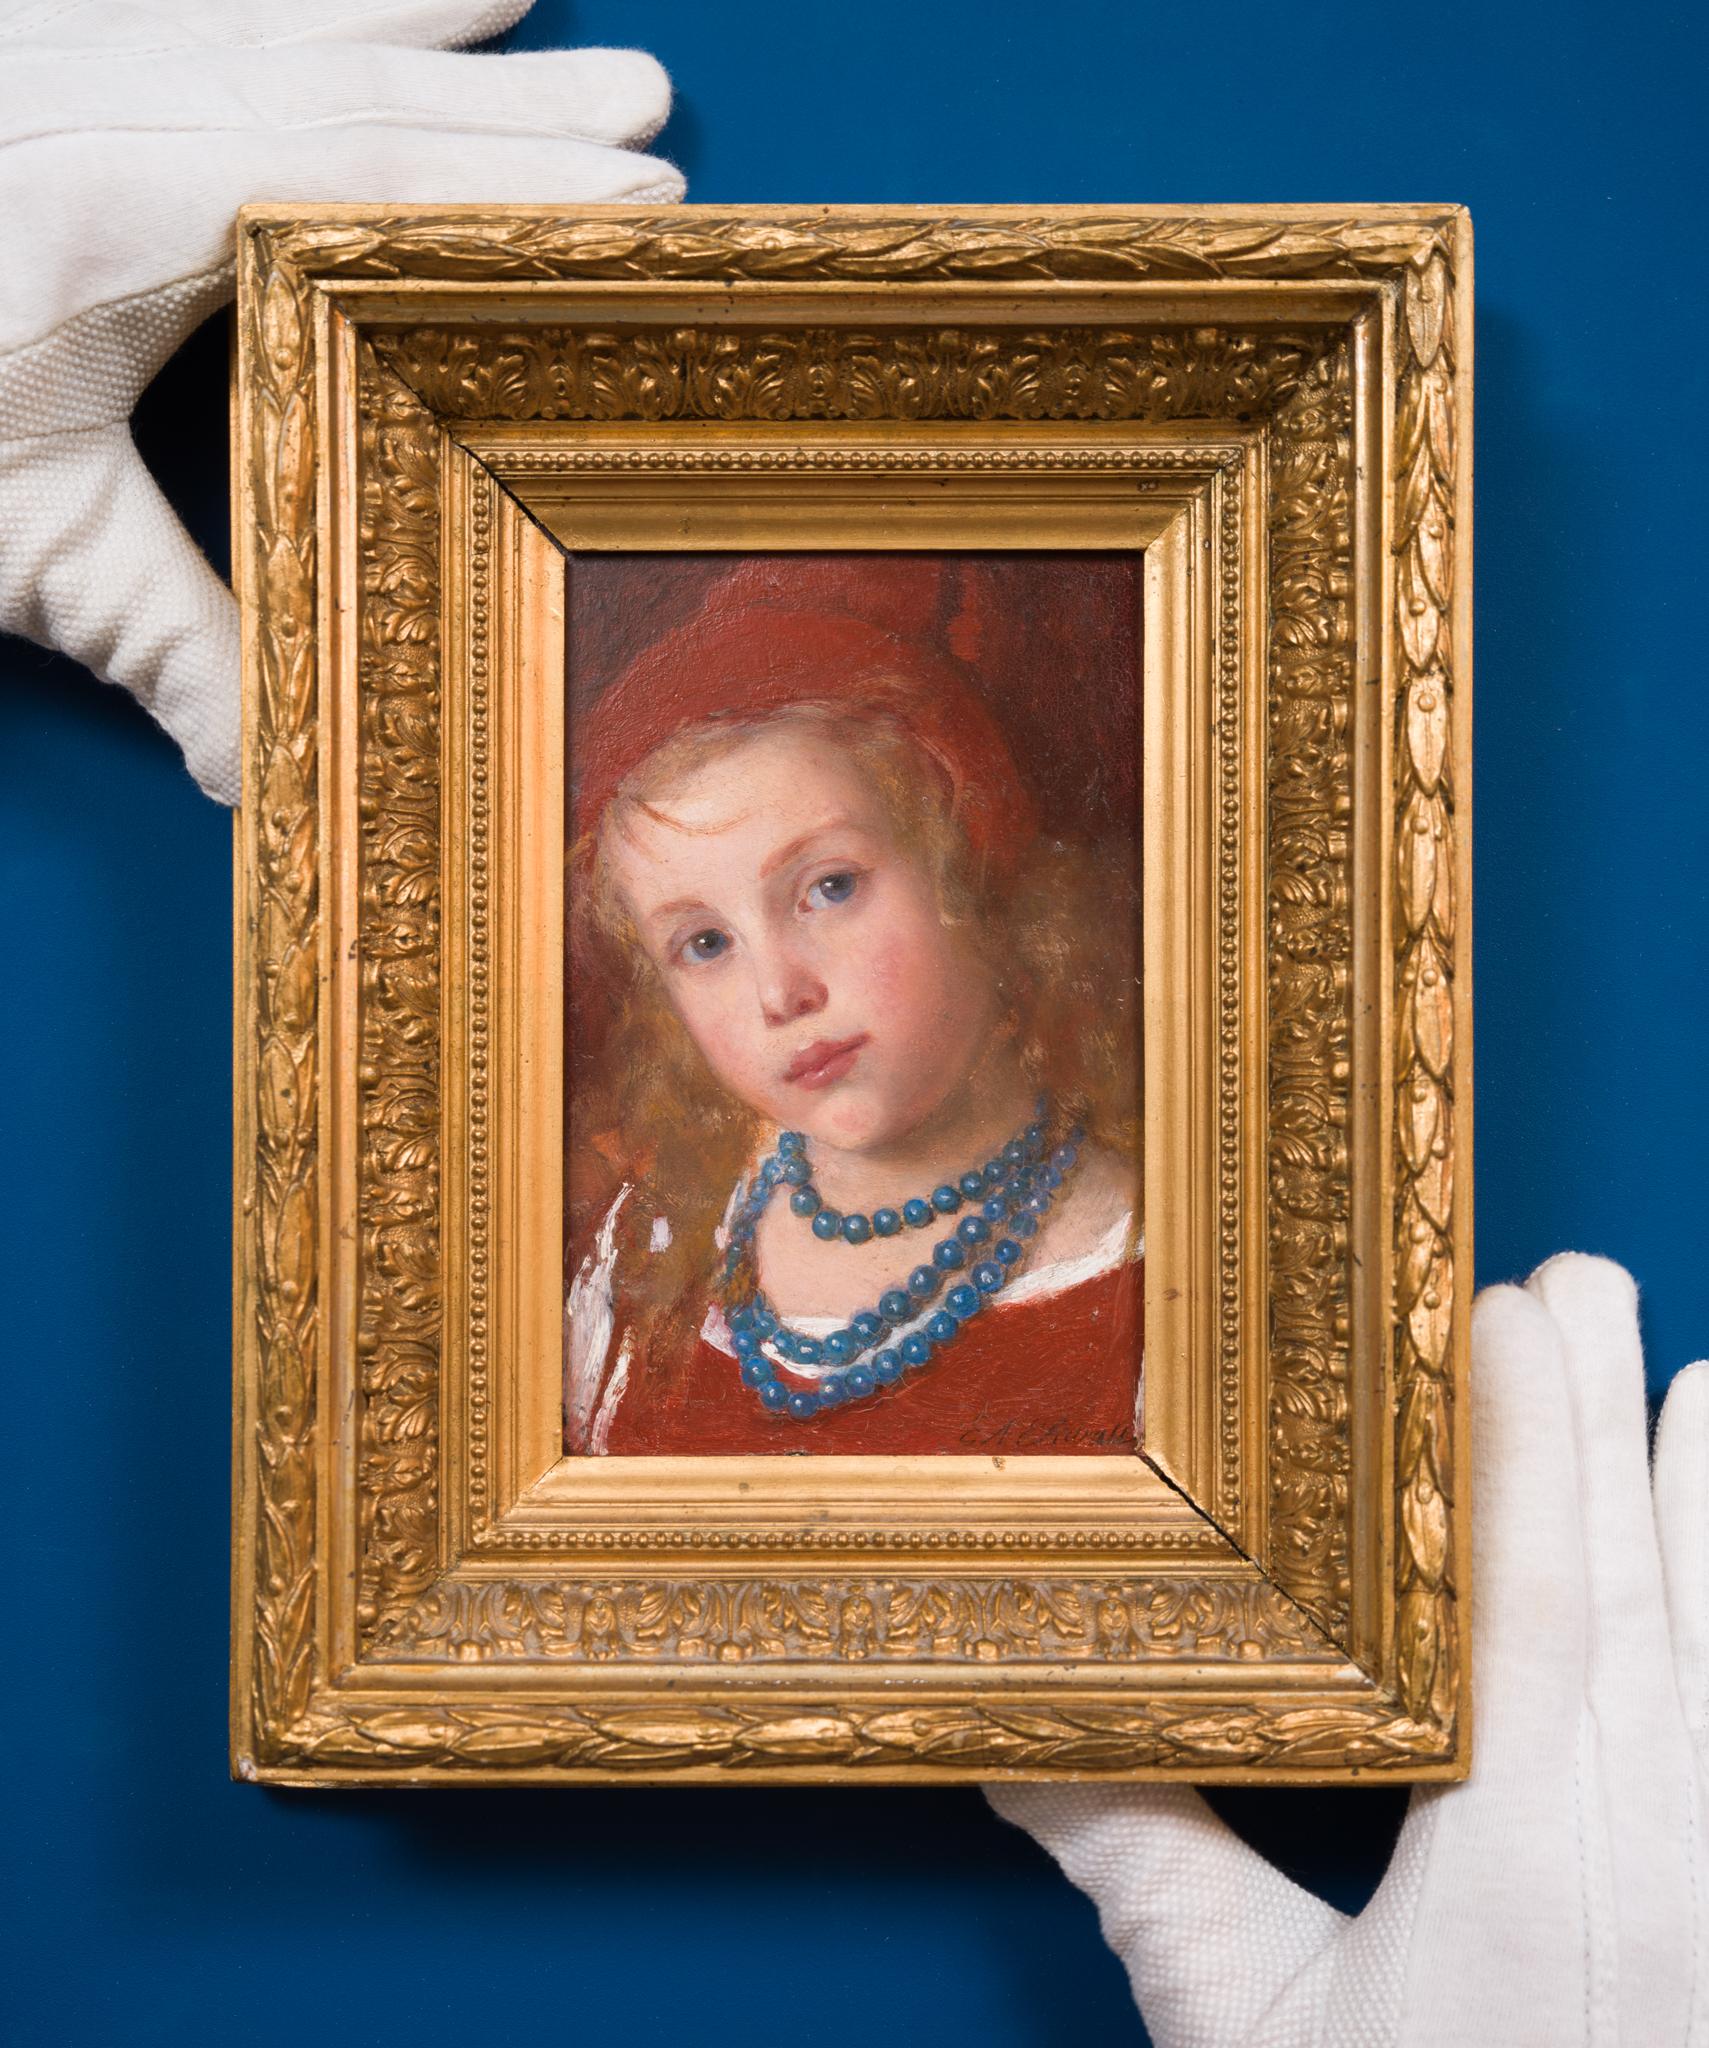 Portrait of a Girl With Blue Necklace by Swedish Artist Emma Ekwall 1